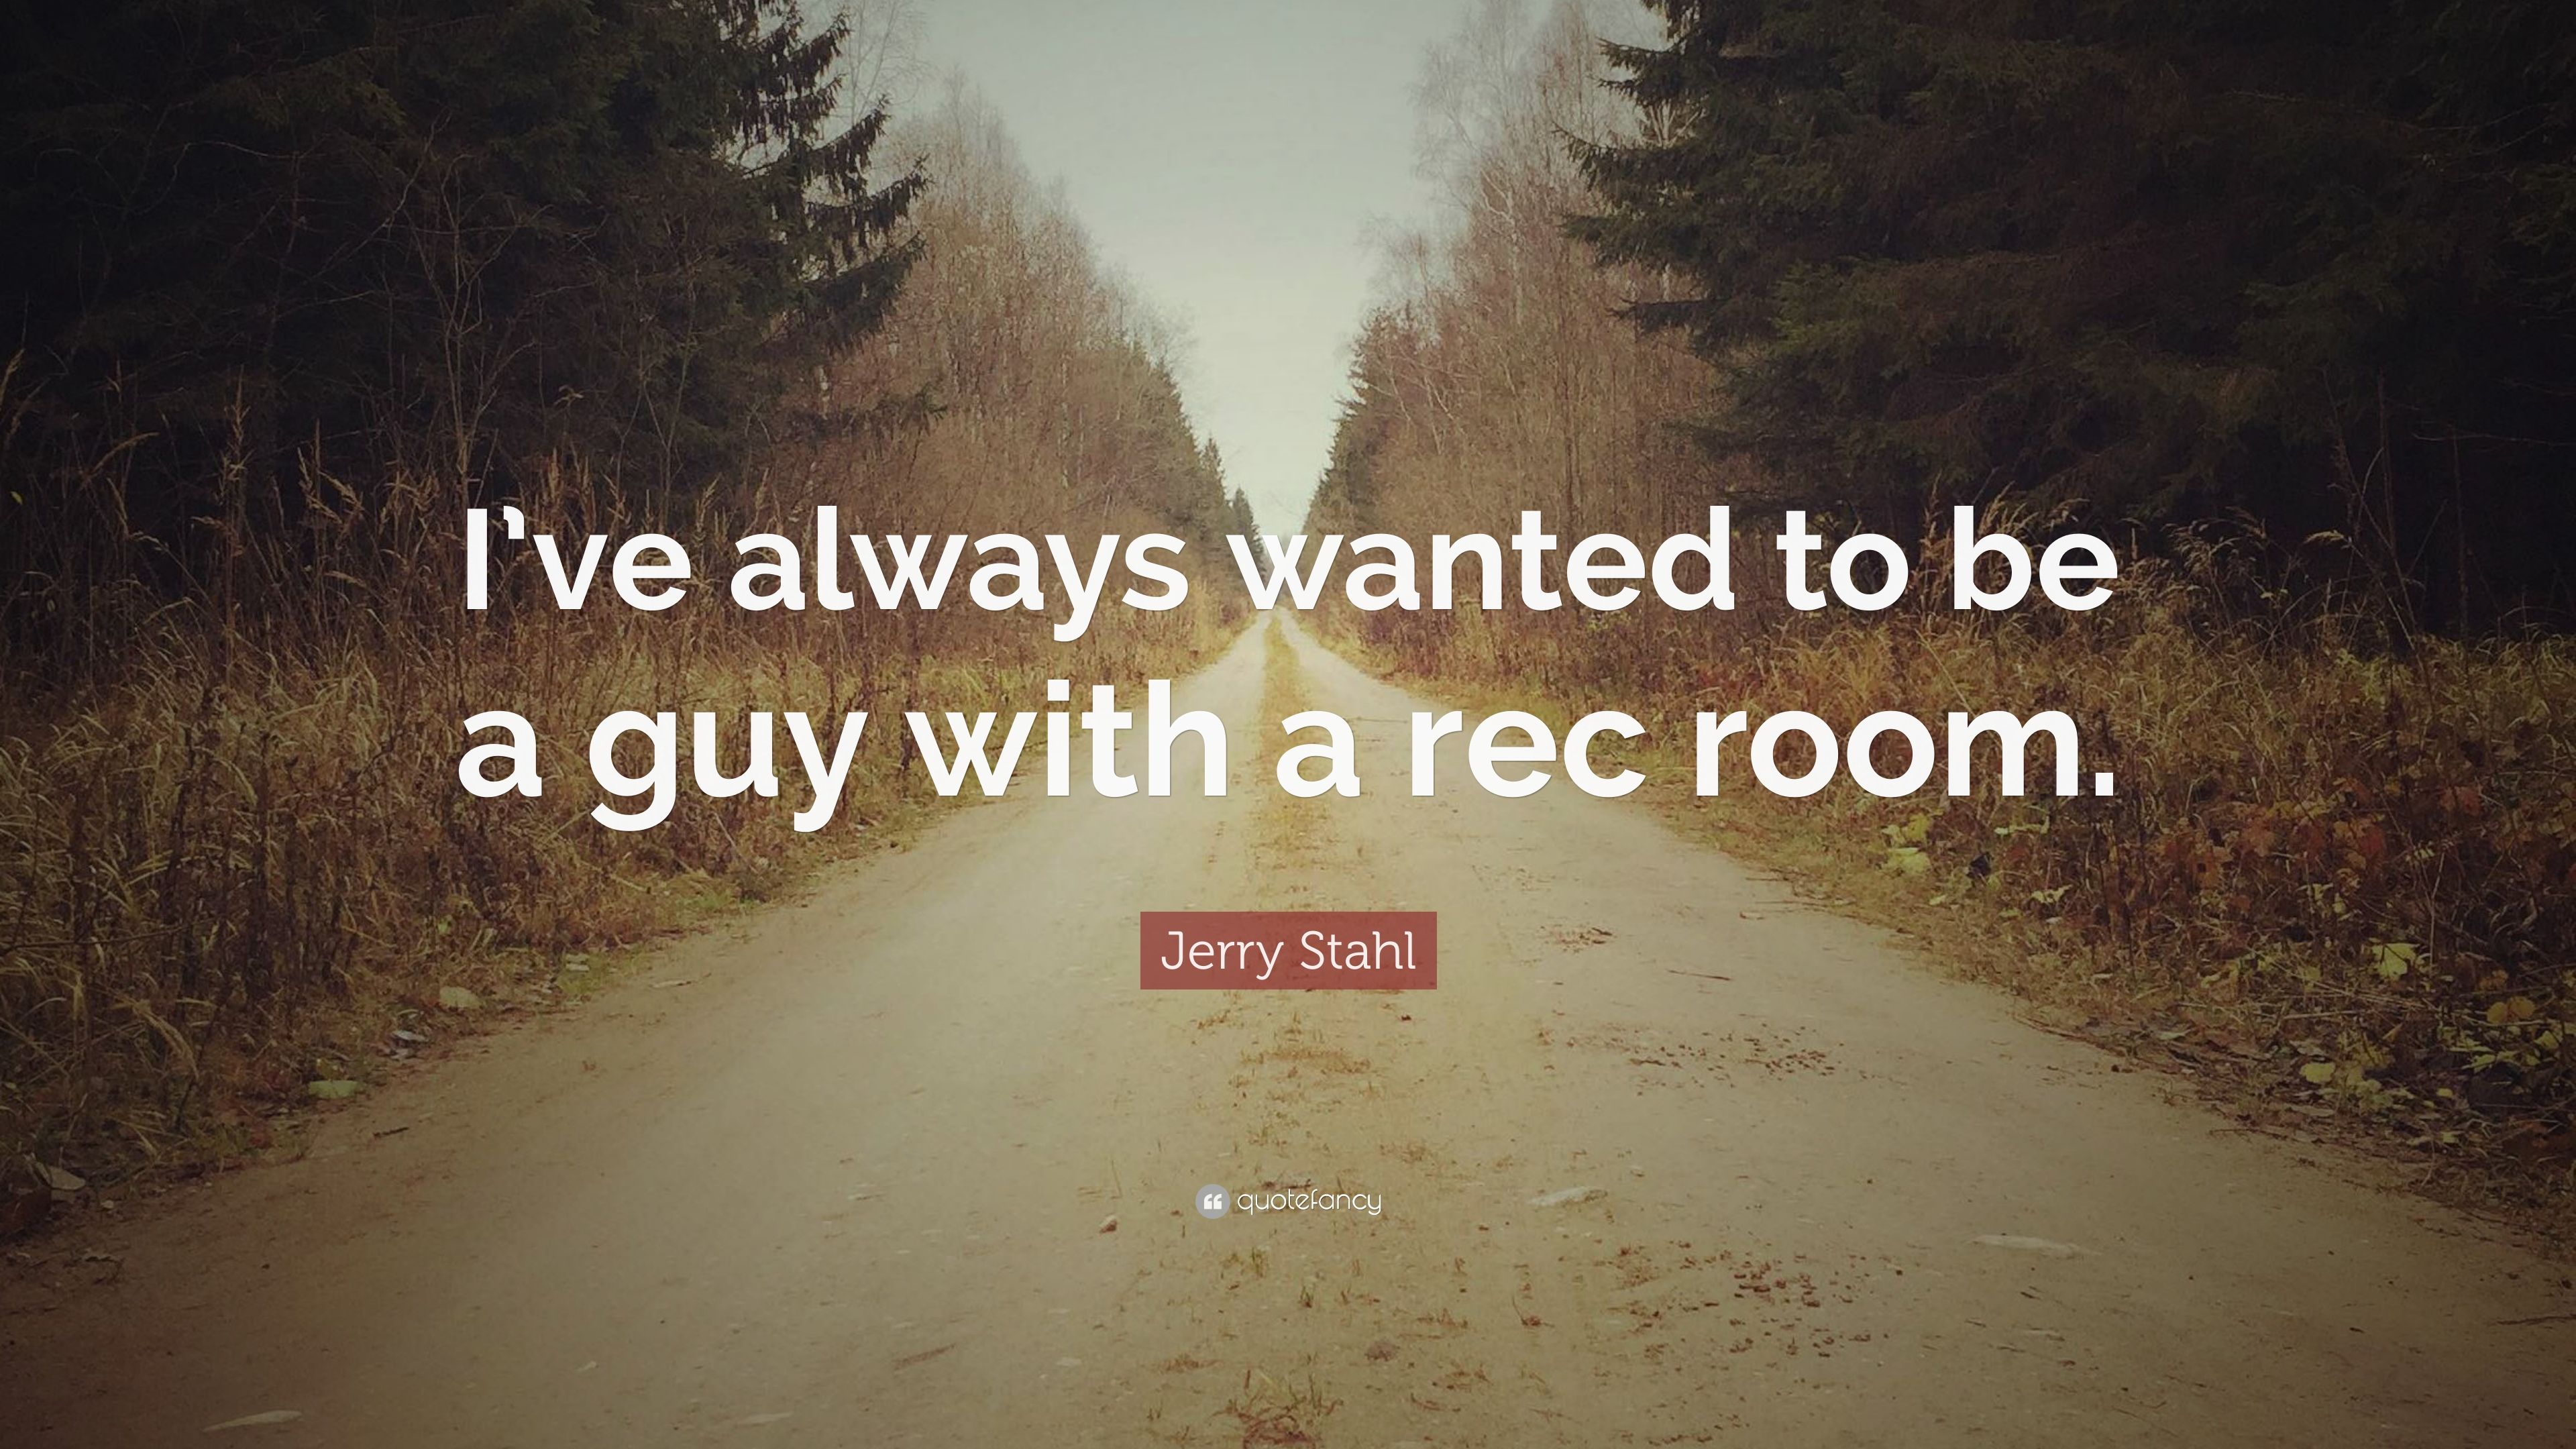 Jerry Stahl Quote: “I've always wanted to be a guy with a rec room